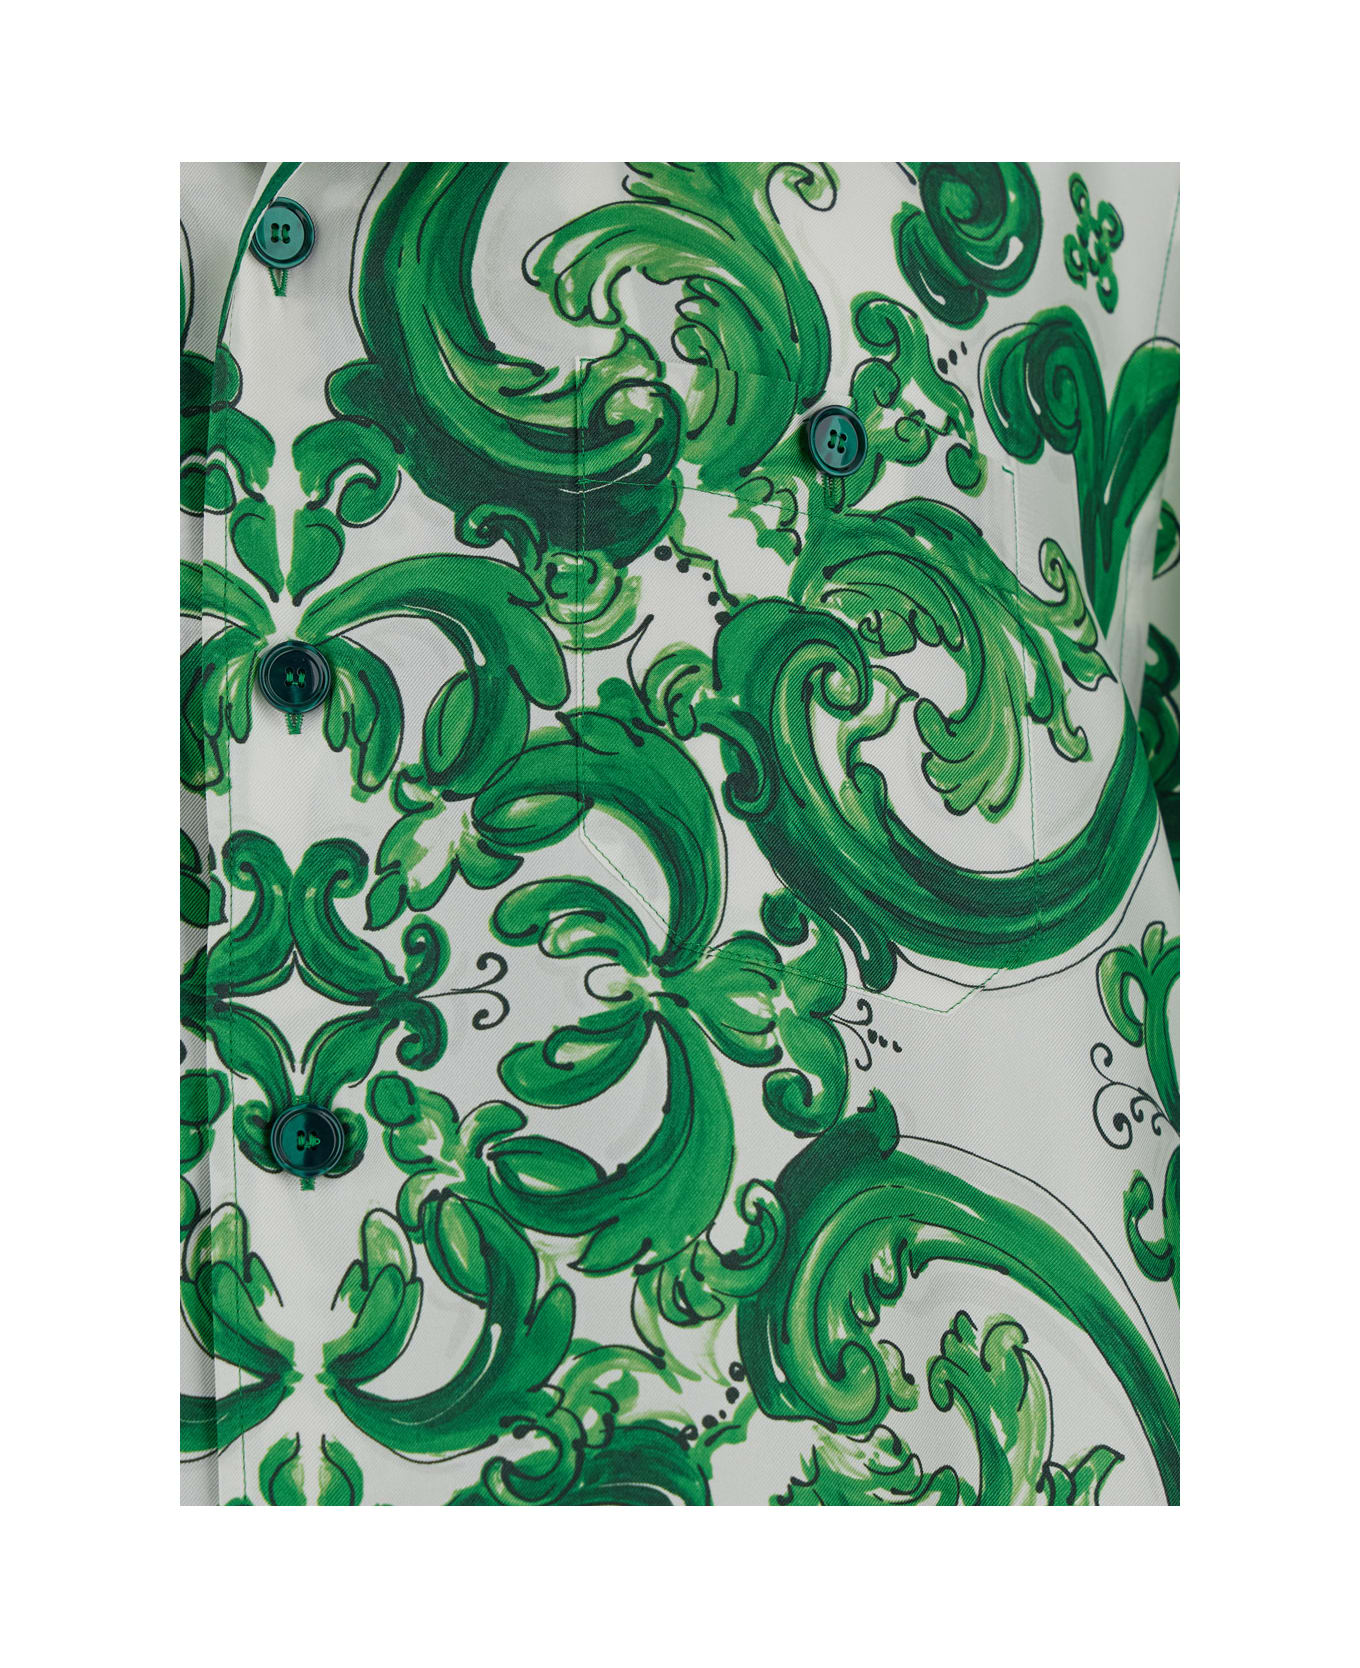 Dolce & Gabbana 'palermo' Green And White Bowling Shirt With Majolica Print In Silk Man - Green